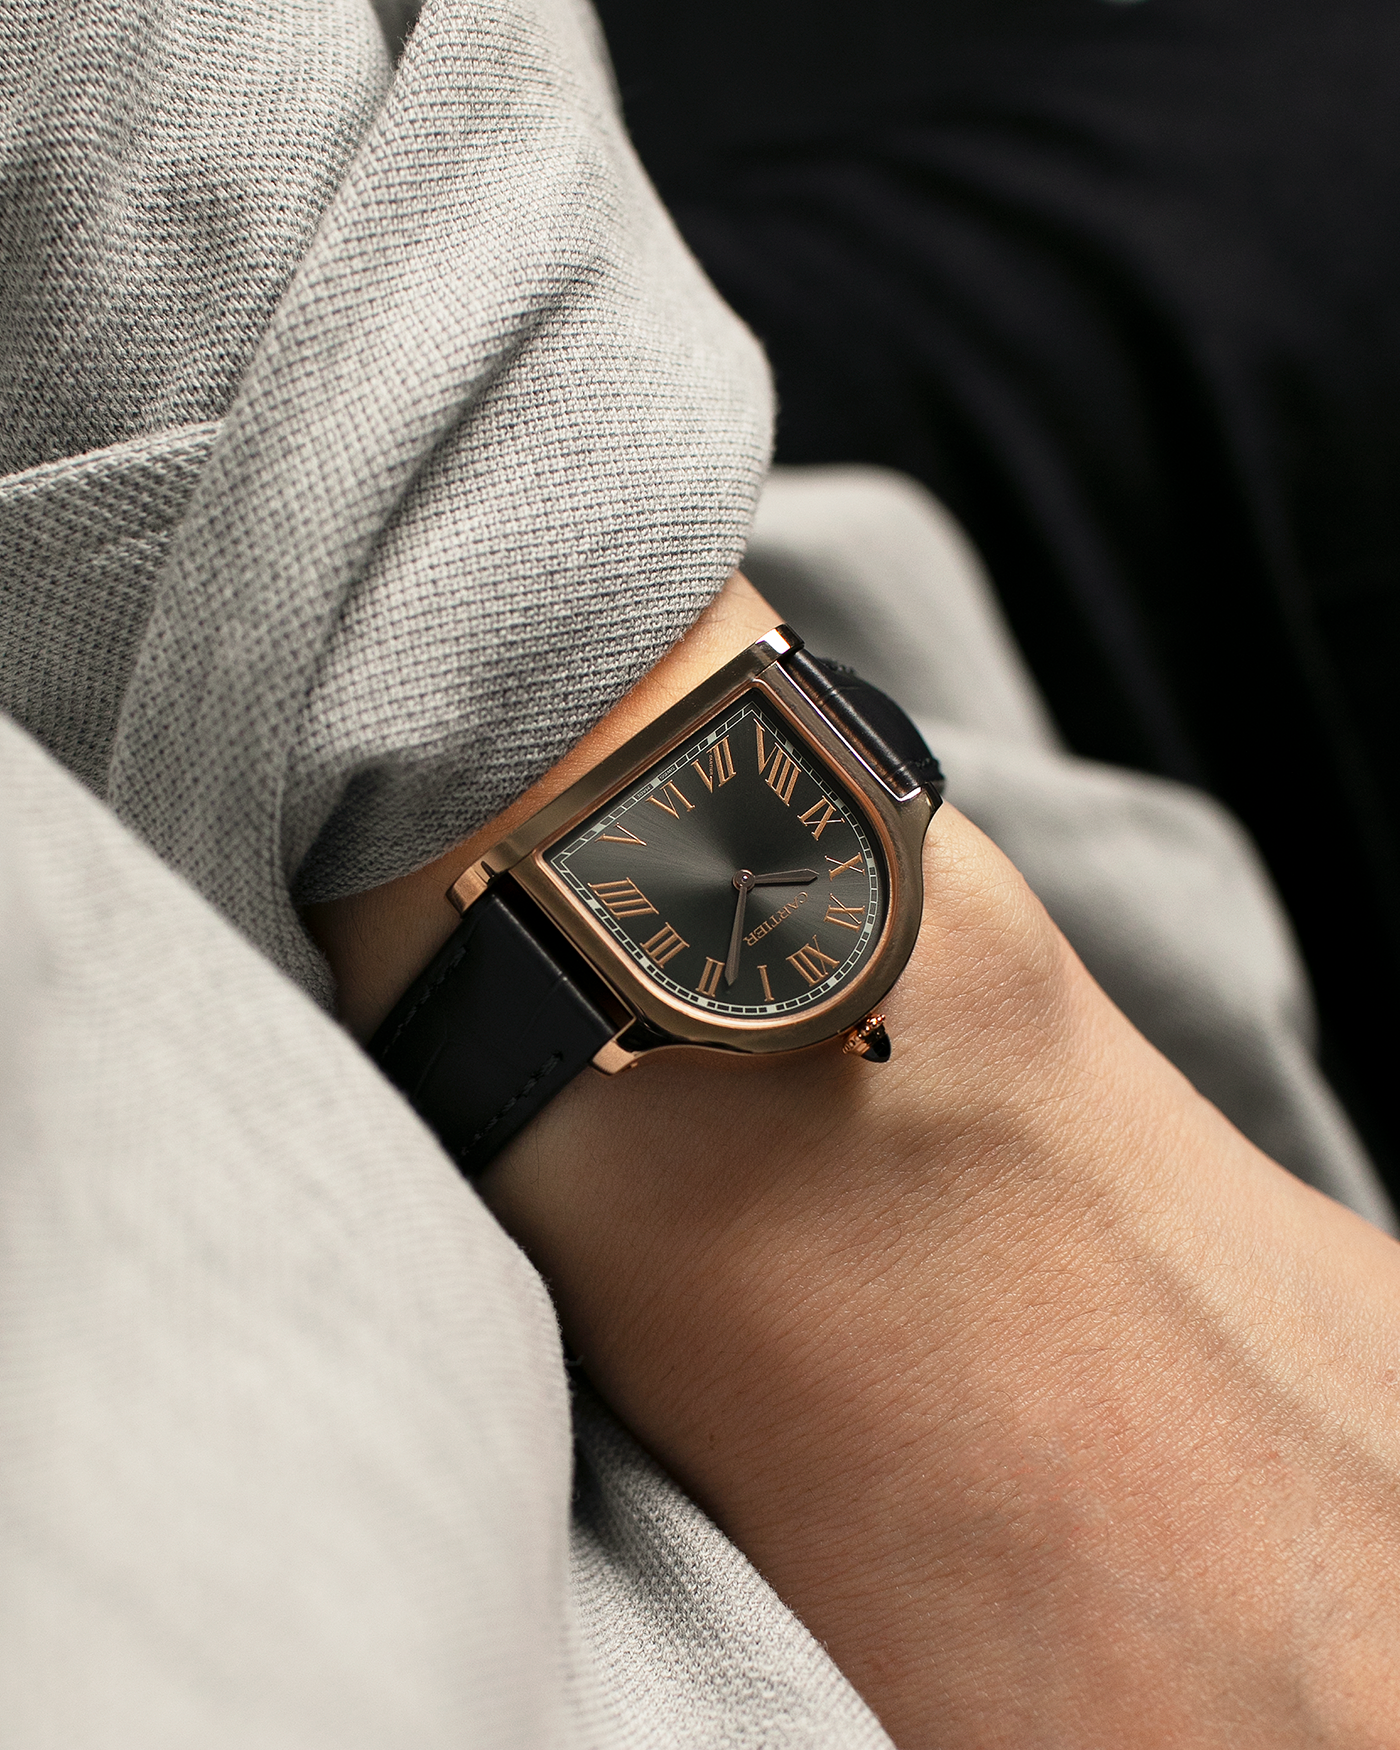 Brand: Cartier Year: 2021 Model: Cartier Privé Collection Cloche De Cartier, Limited to 100 Pieces Reference: CRWGCC0003 Material: 18-carat Rose Gold Movement: Cartier Cal. 1917MC, Manual-Winding Case Dimensions: 37.15mm x 28.75mm and 6.7mm Lug Width: 16mm Strap: Cartier Grey Alligator Leather Strap with Signed 18-carat Rose Gold Tang Buckle